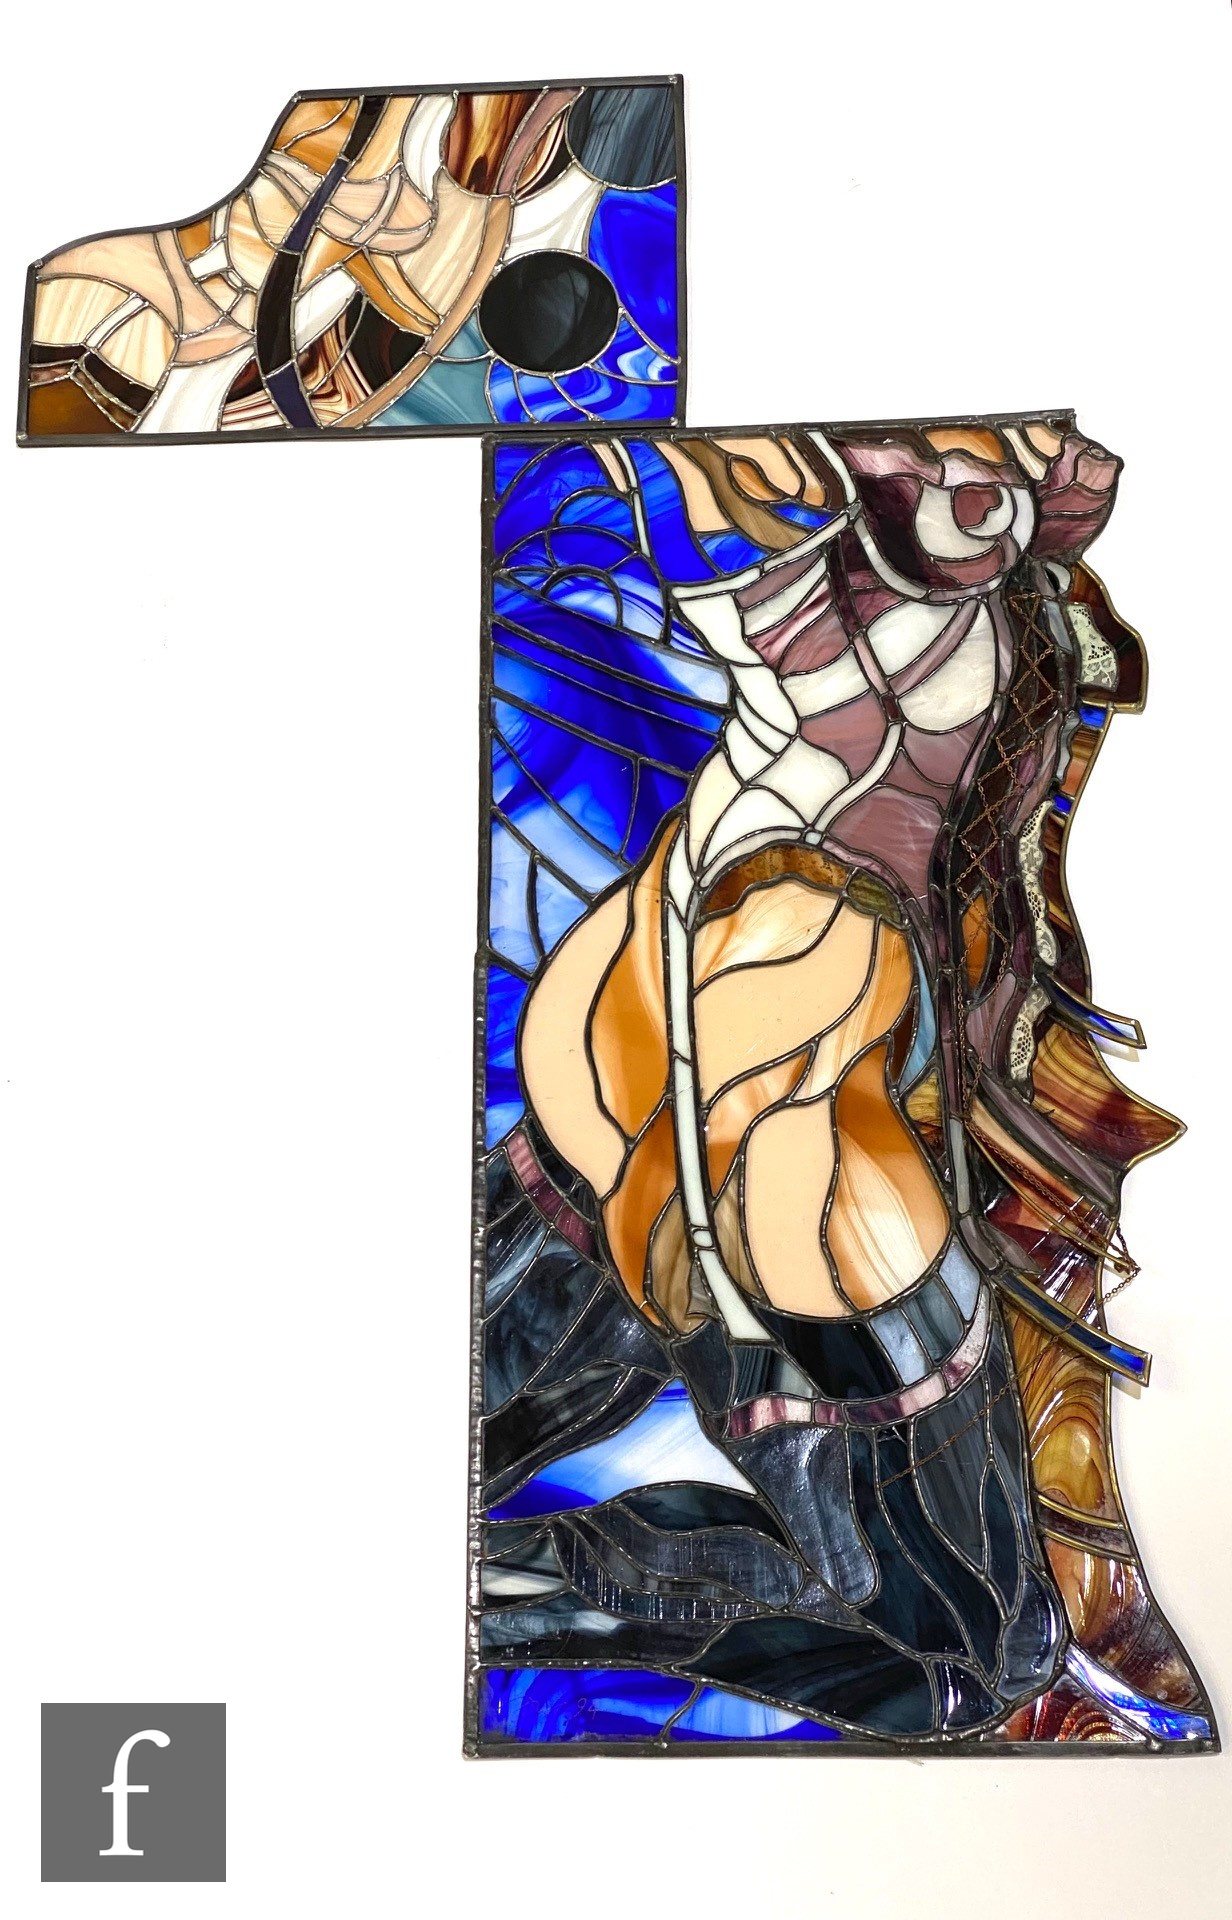 Unknown - A large stained glass panel depicting an abstract view of a female torso wearing stockings